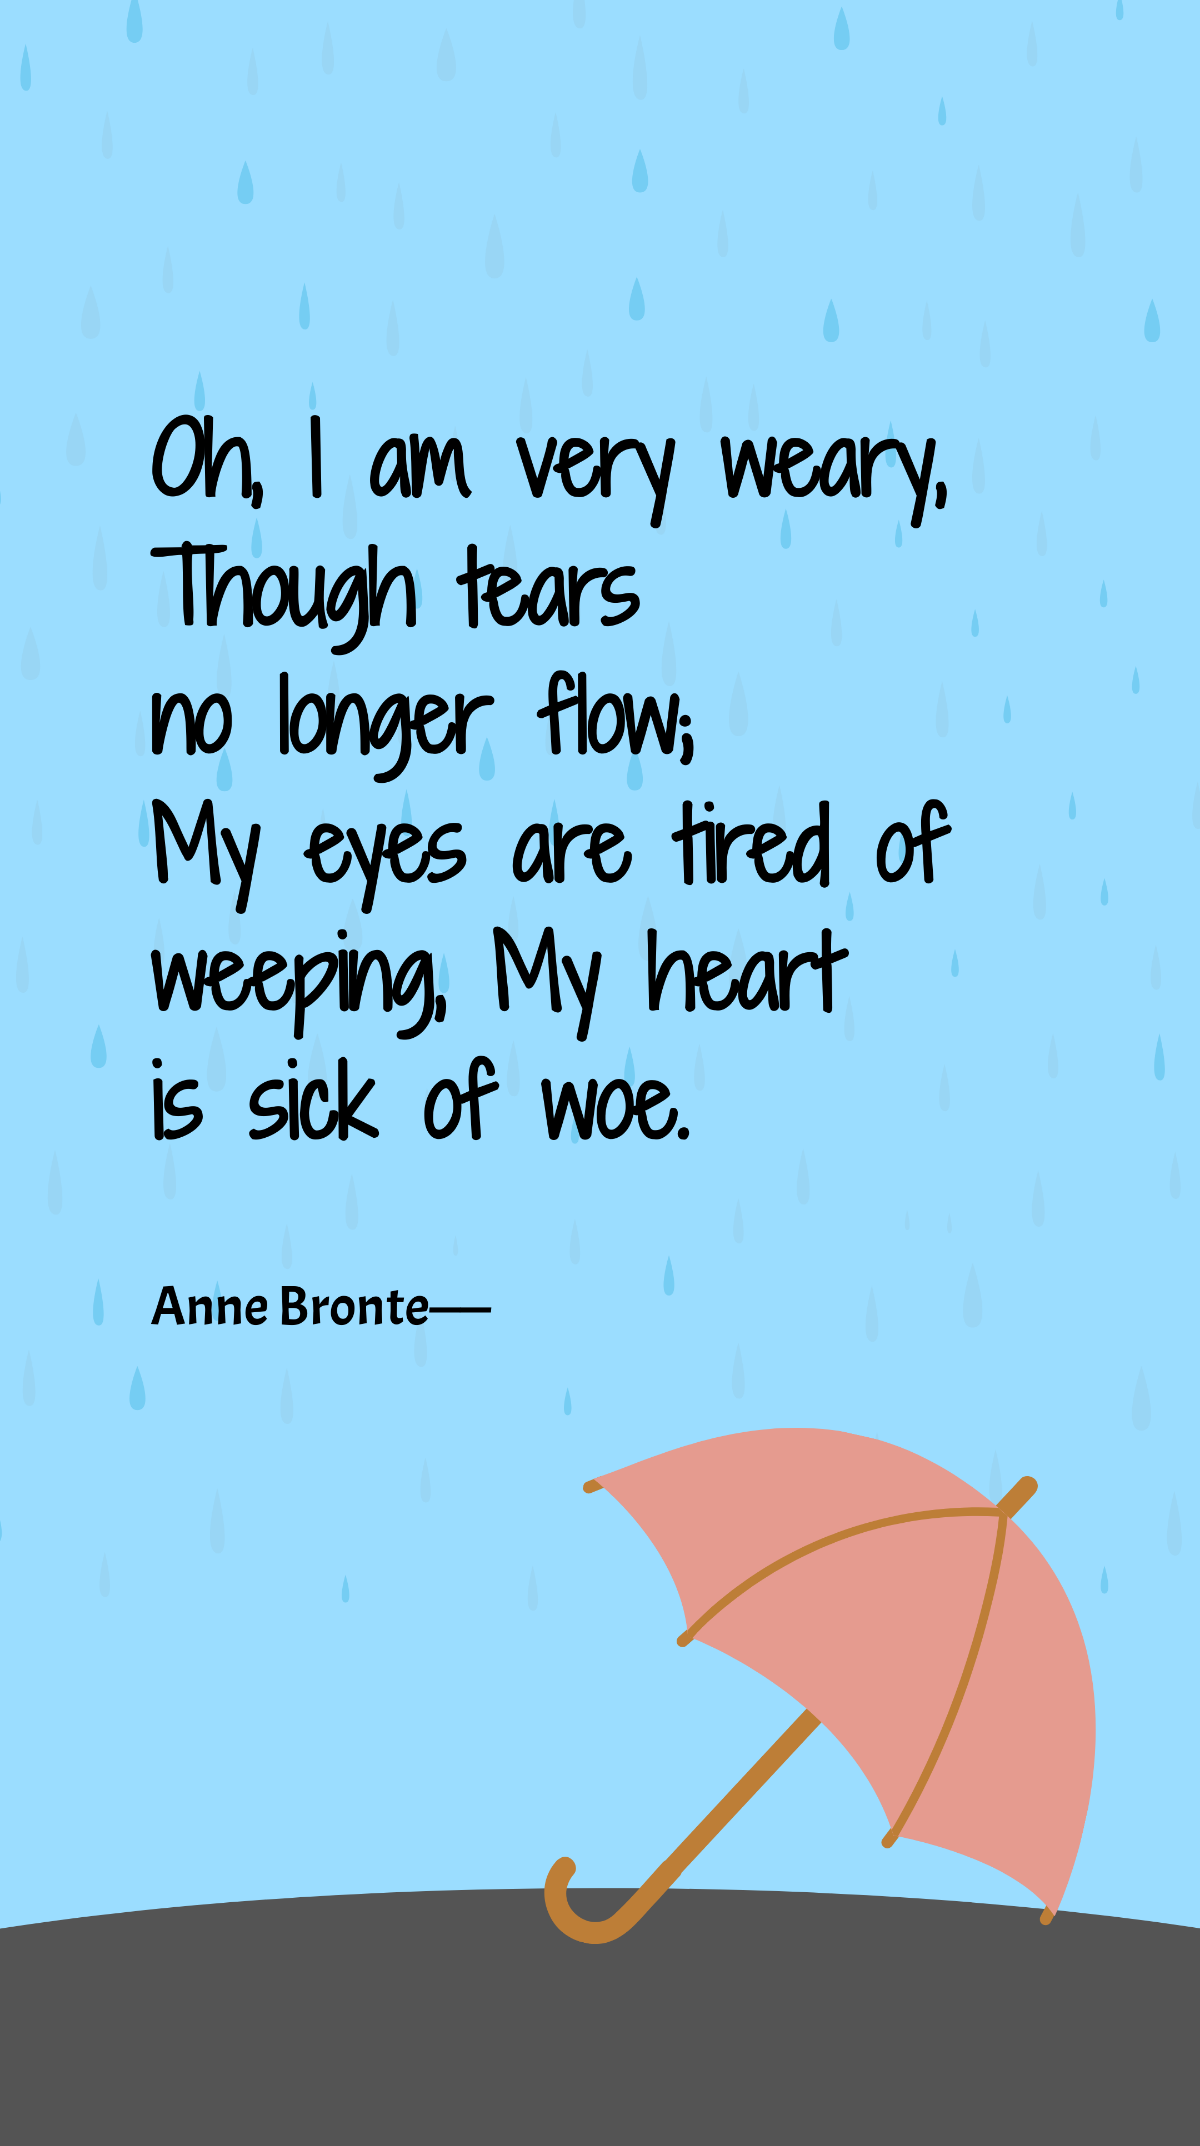 Anne Bronte - Oh, I am very weary, Though tears no longer flow; My eyes are tired of weeping, My heart is sick of woe. Template